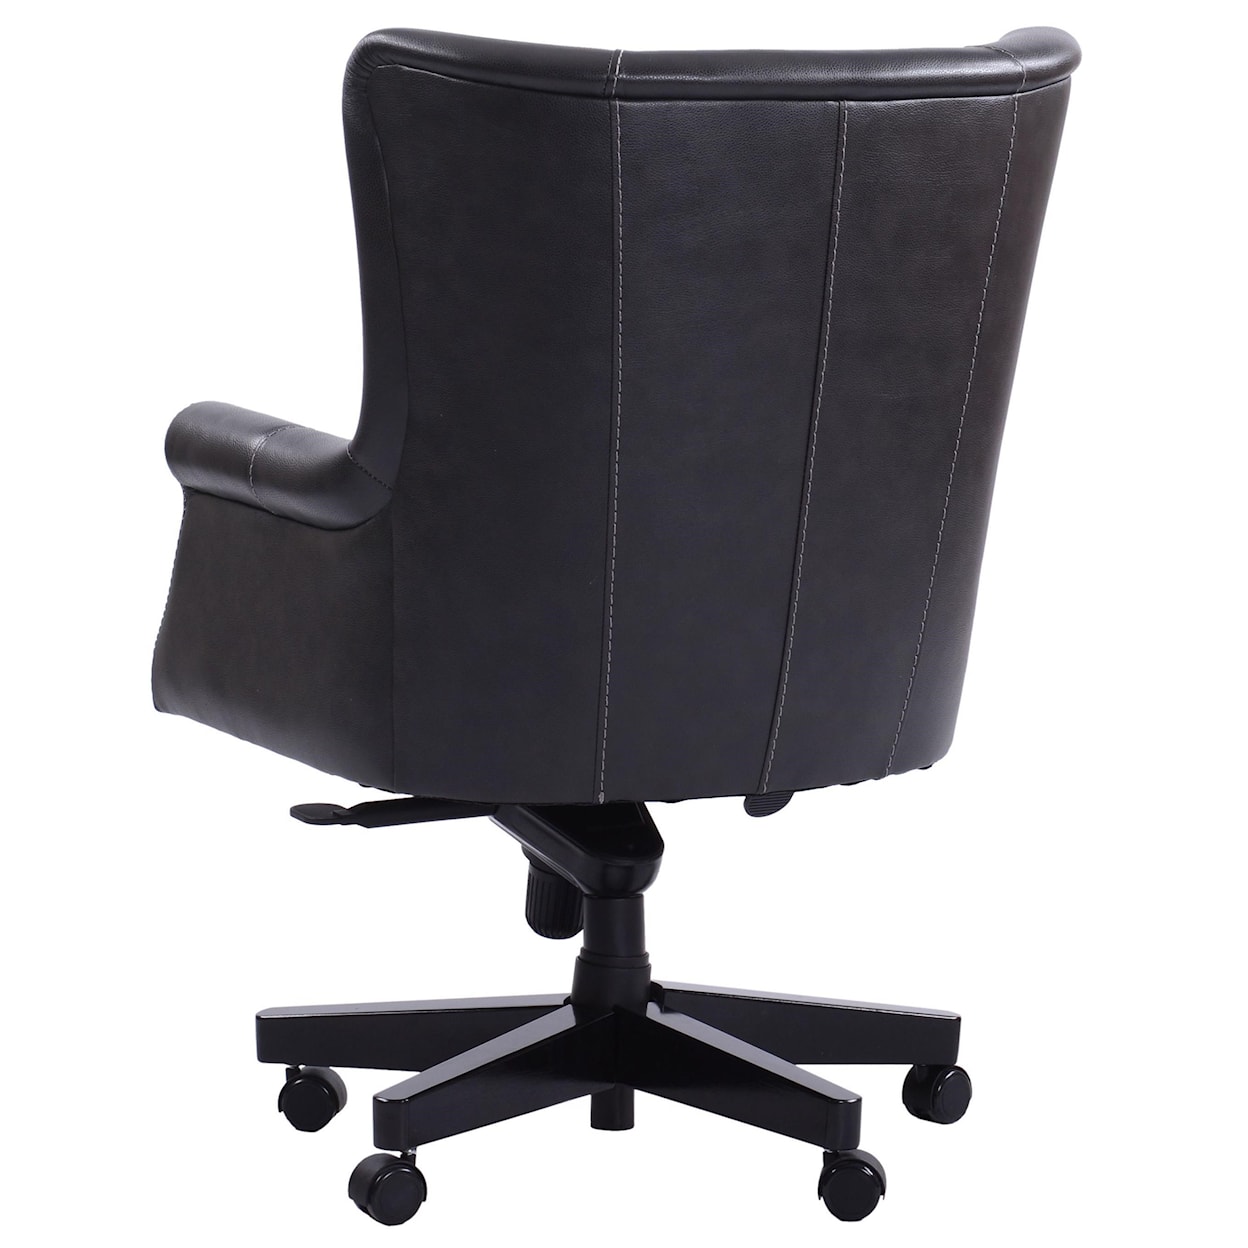 Paramount Living Desk Chairs Leather Desk Chair